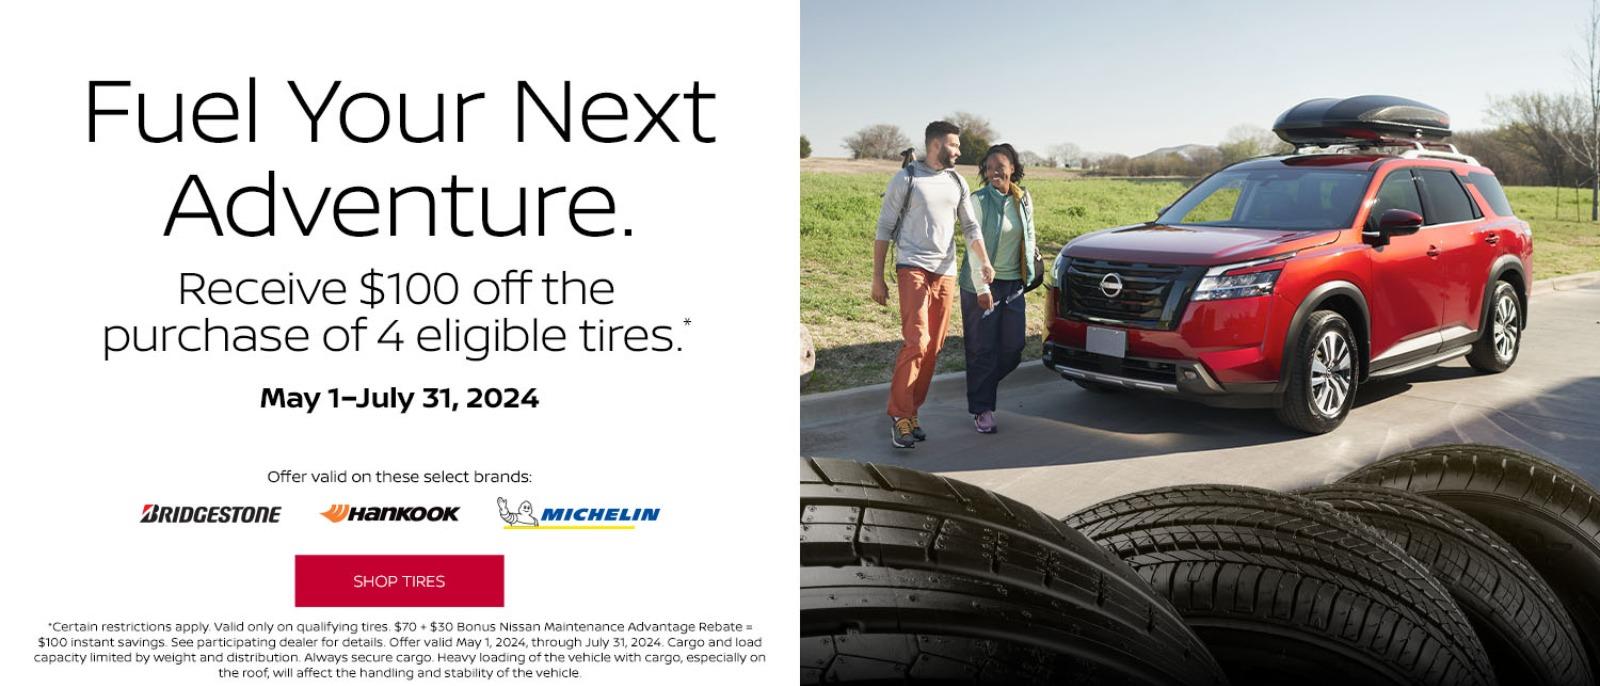 Fuel Your Next Adventure.
Receive $100 off the purchase of 4 eligible tires.-
May 1 - July 31, 2024
Shop Tires